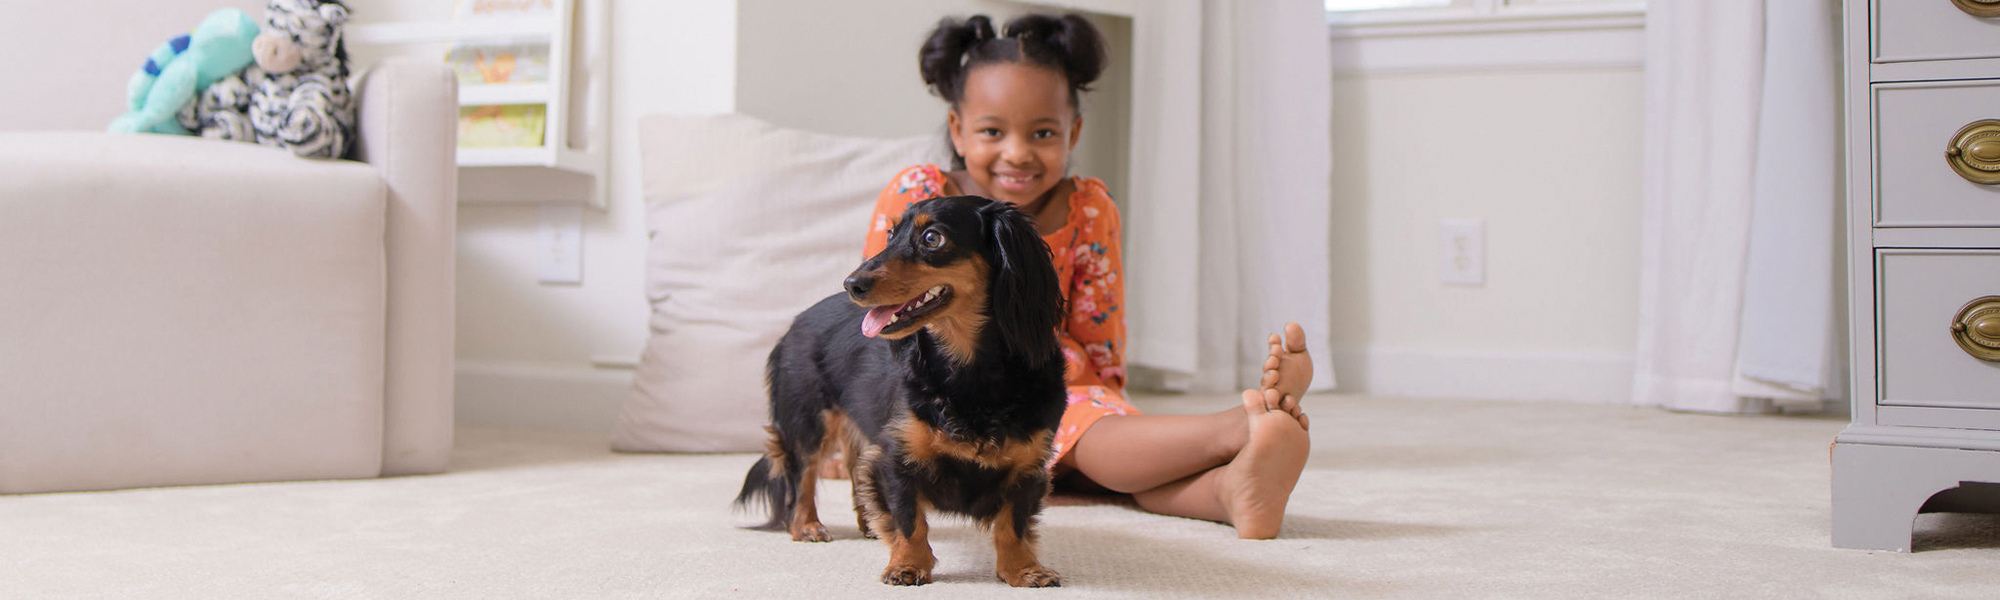 Girl with dog on clean carpet